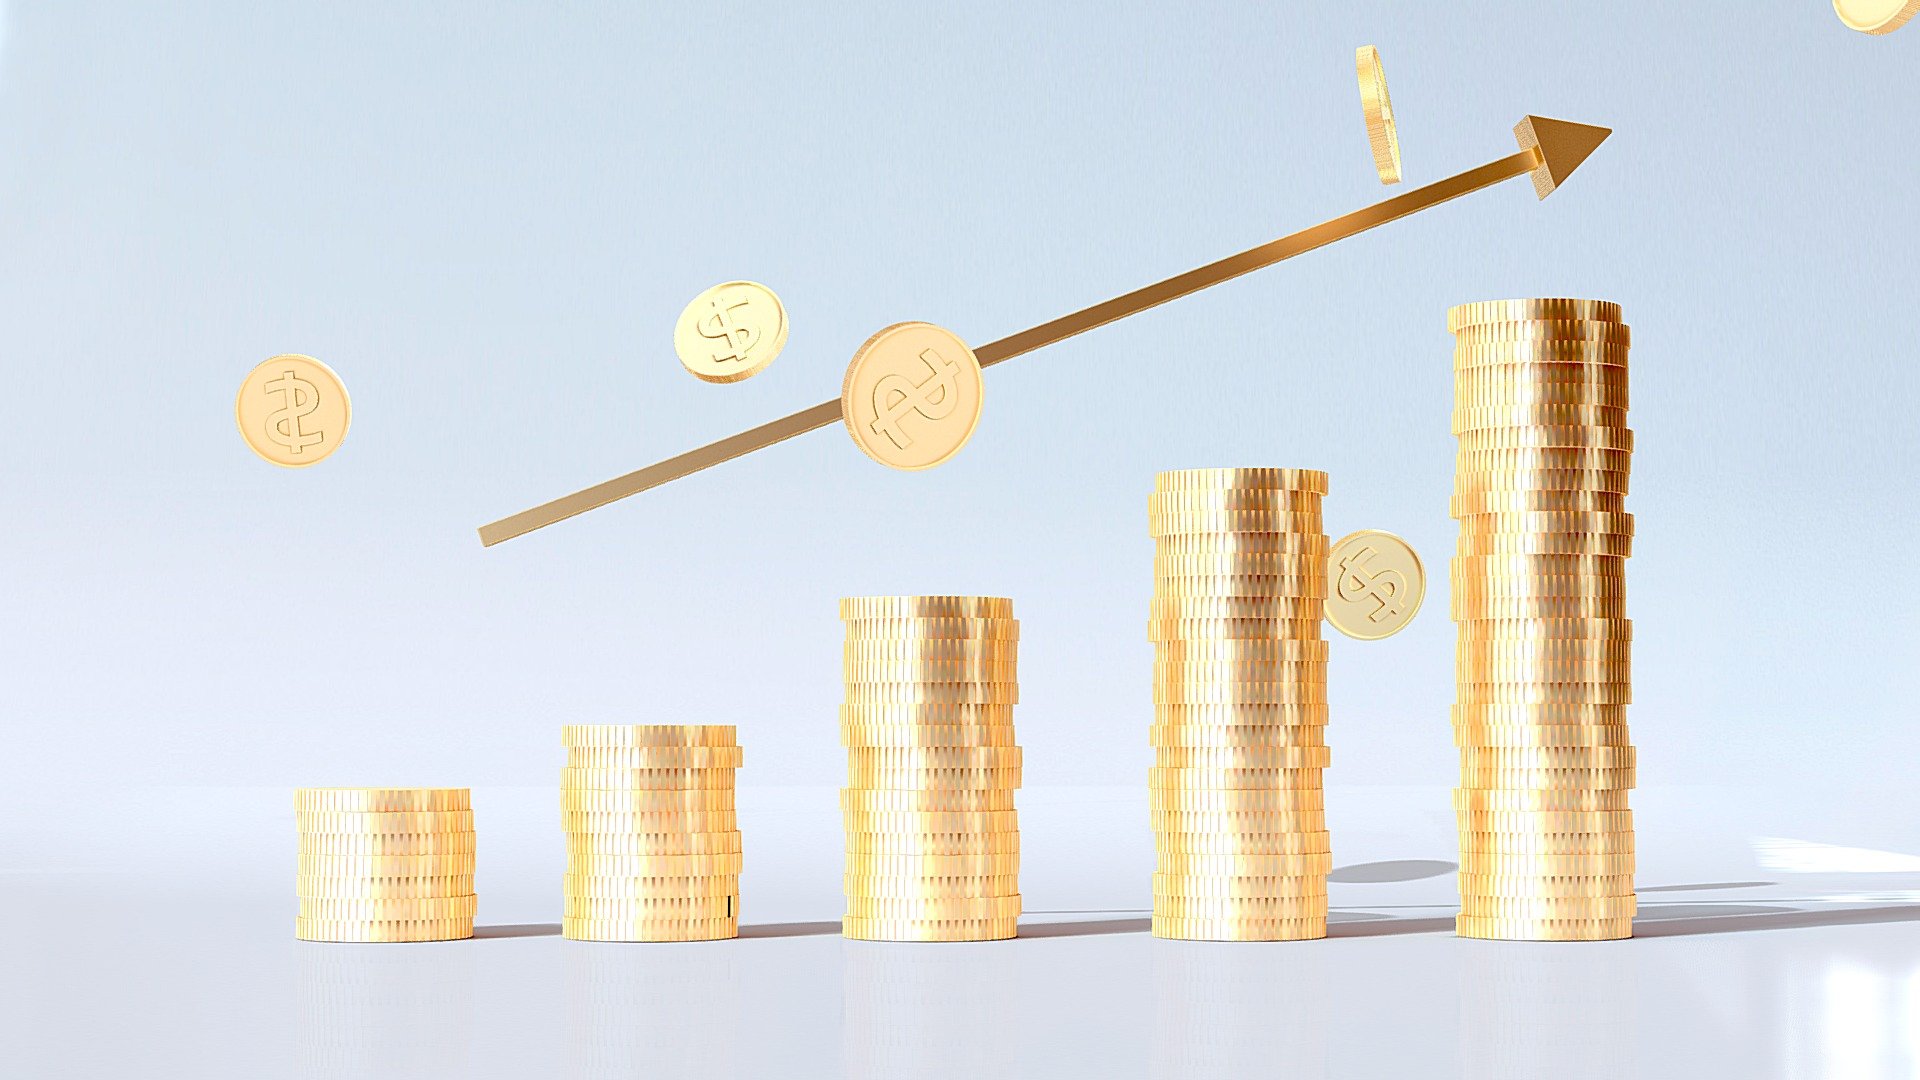 This small piece of work is a model used as an illustration. 
Arrows rising upward represent increasing financial gains.
It can be used to describe many scenarios, such as symbolizing growth in wealth, economy or market share 3d model